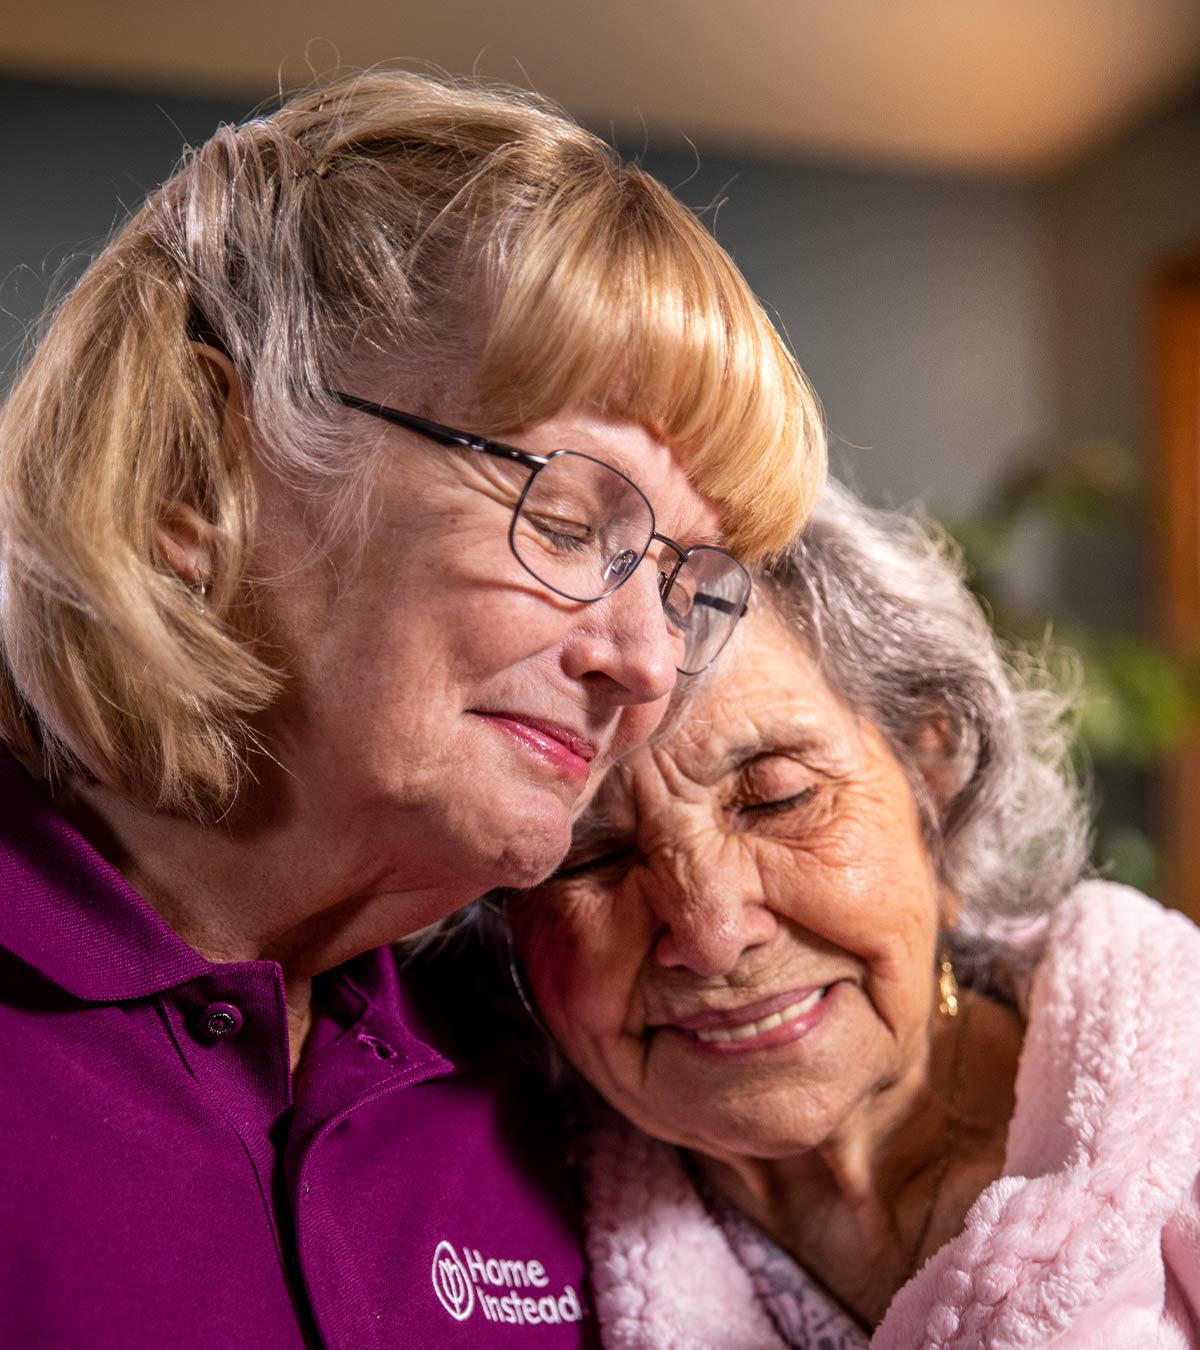 CAREGiver providing in-home senior care services. Home Instead of Northbrook, IL provides Elder Care to aging adults. 